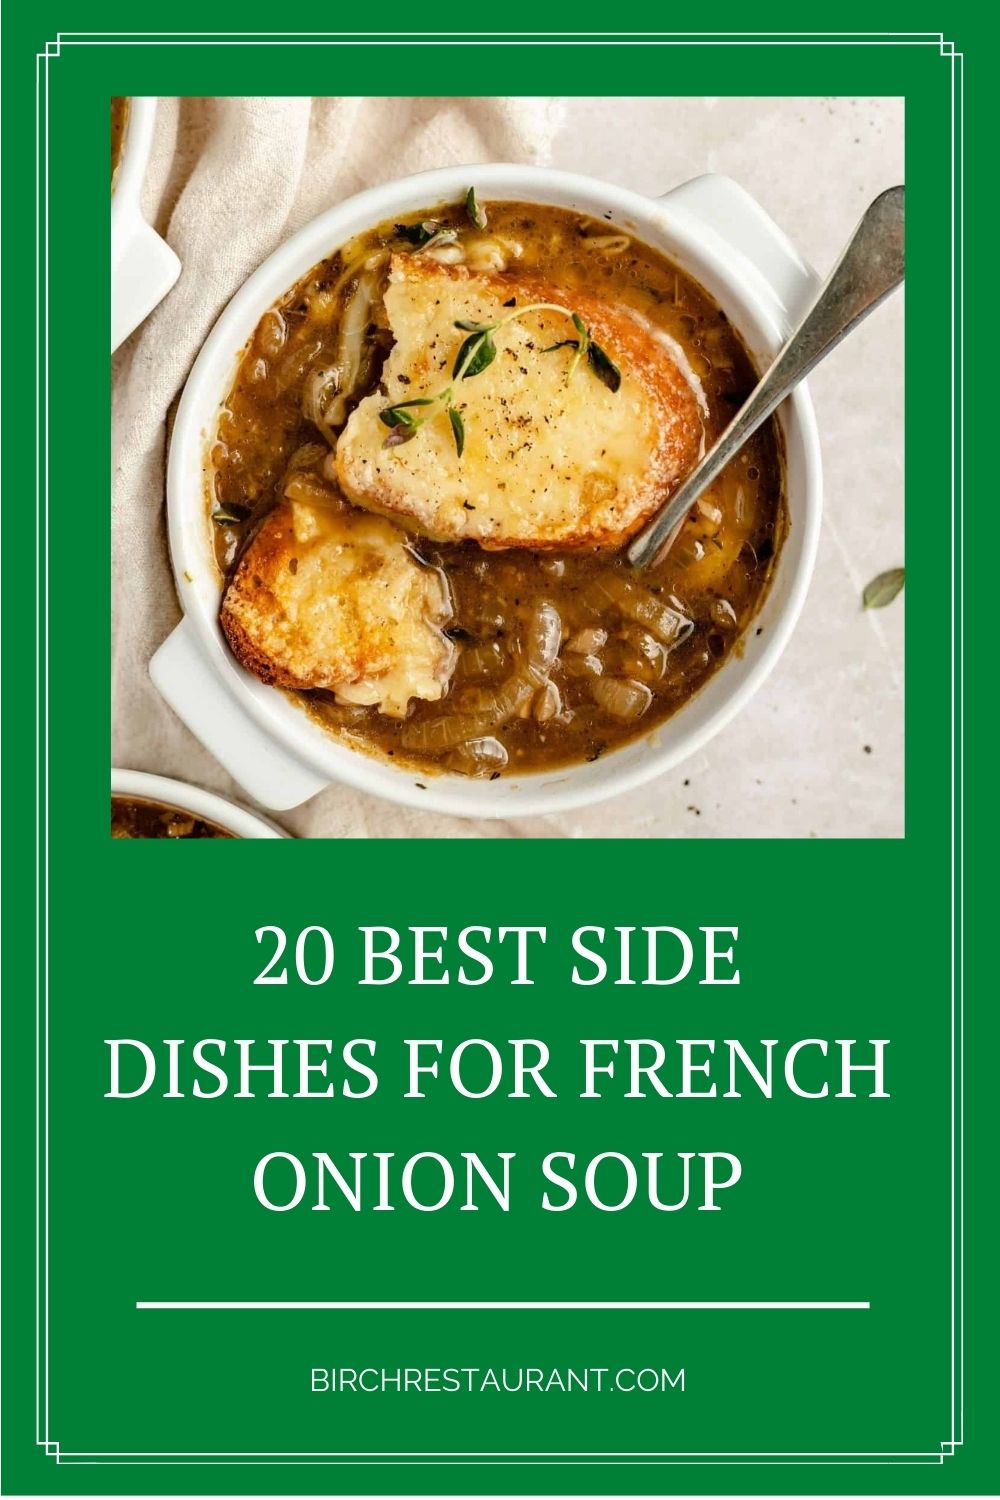 Side Dishes for French Onion Soup